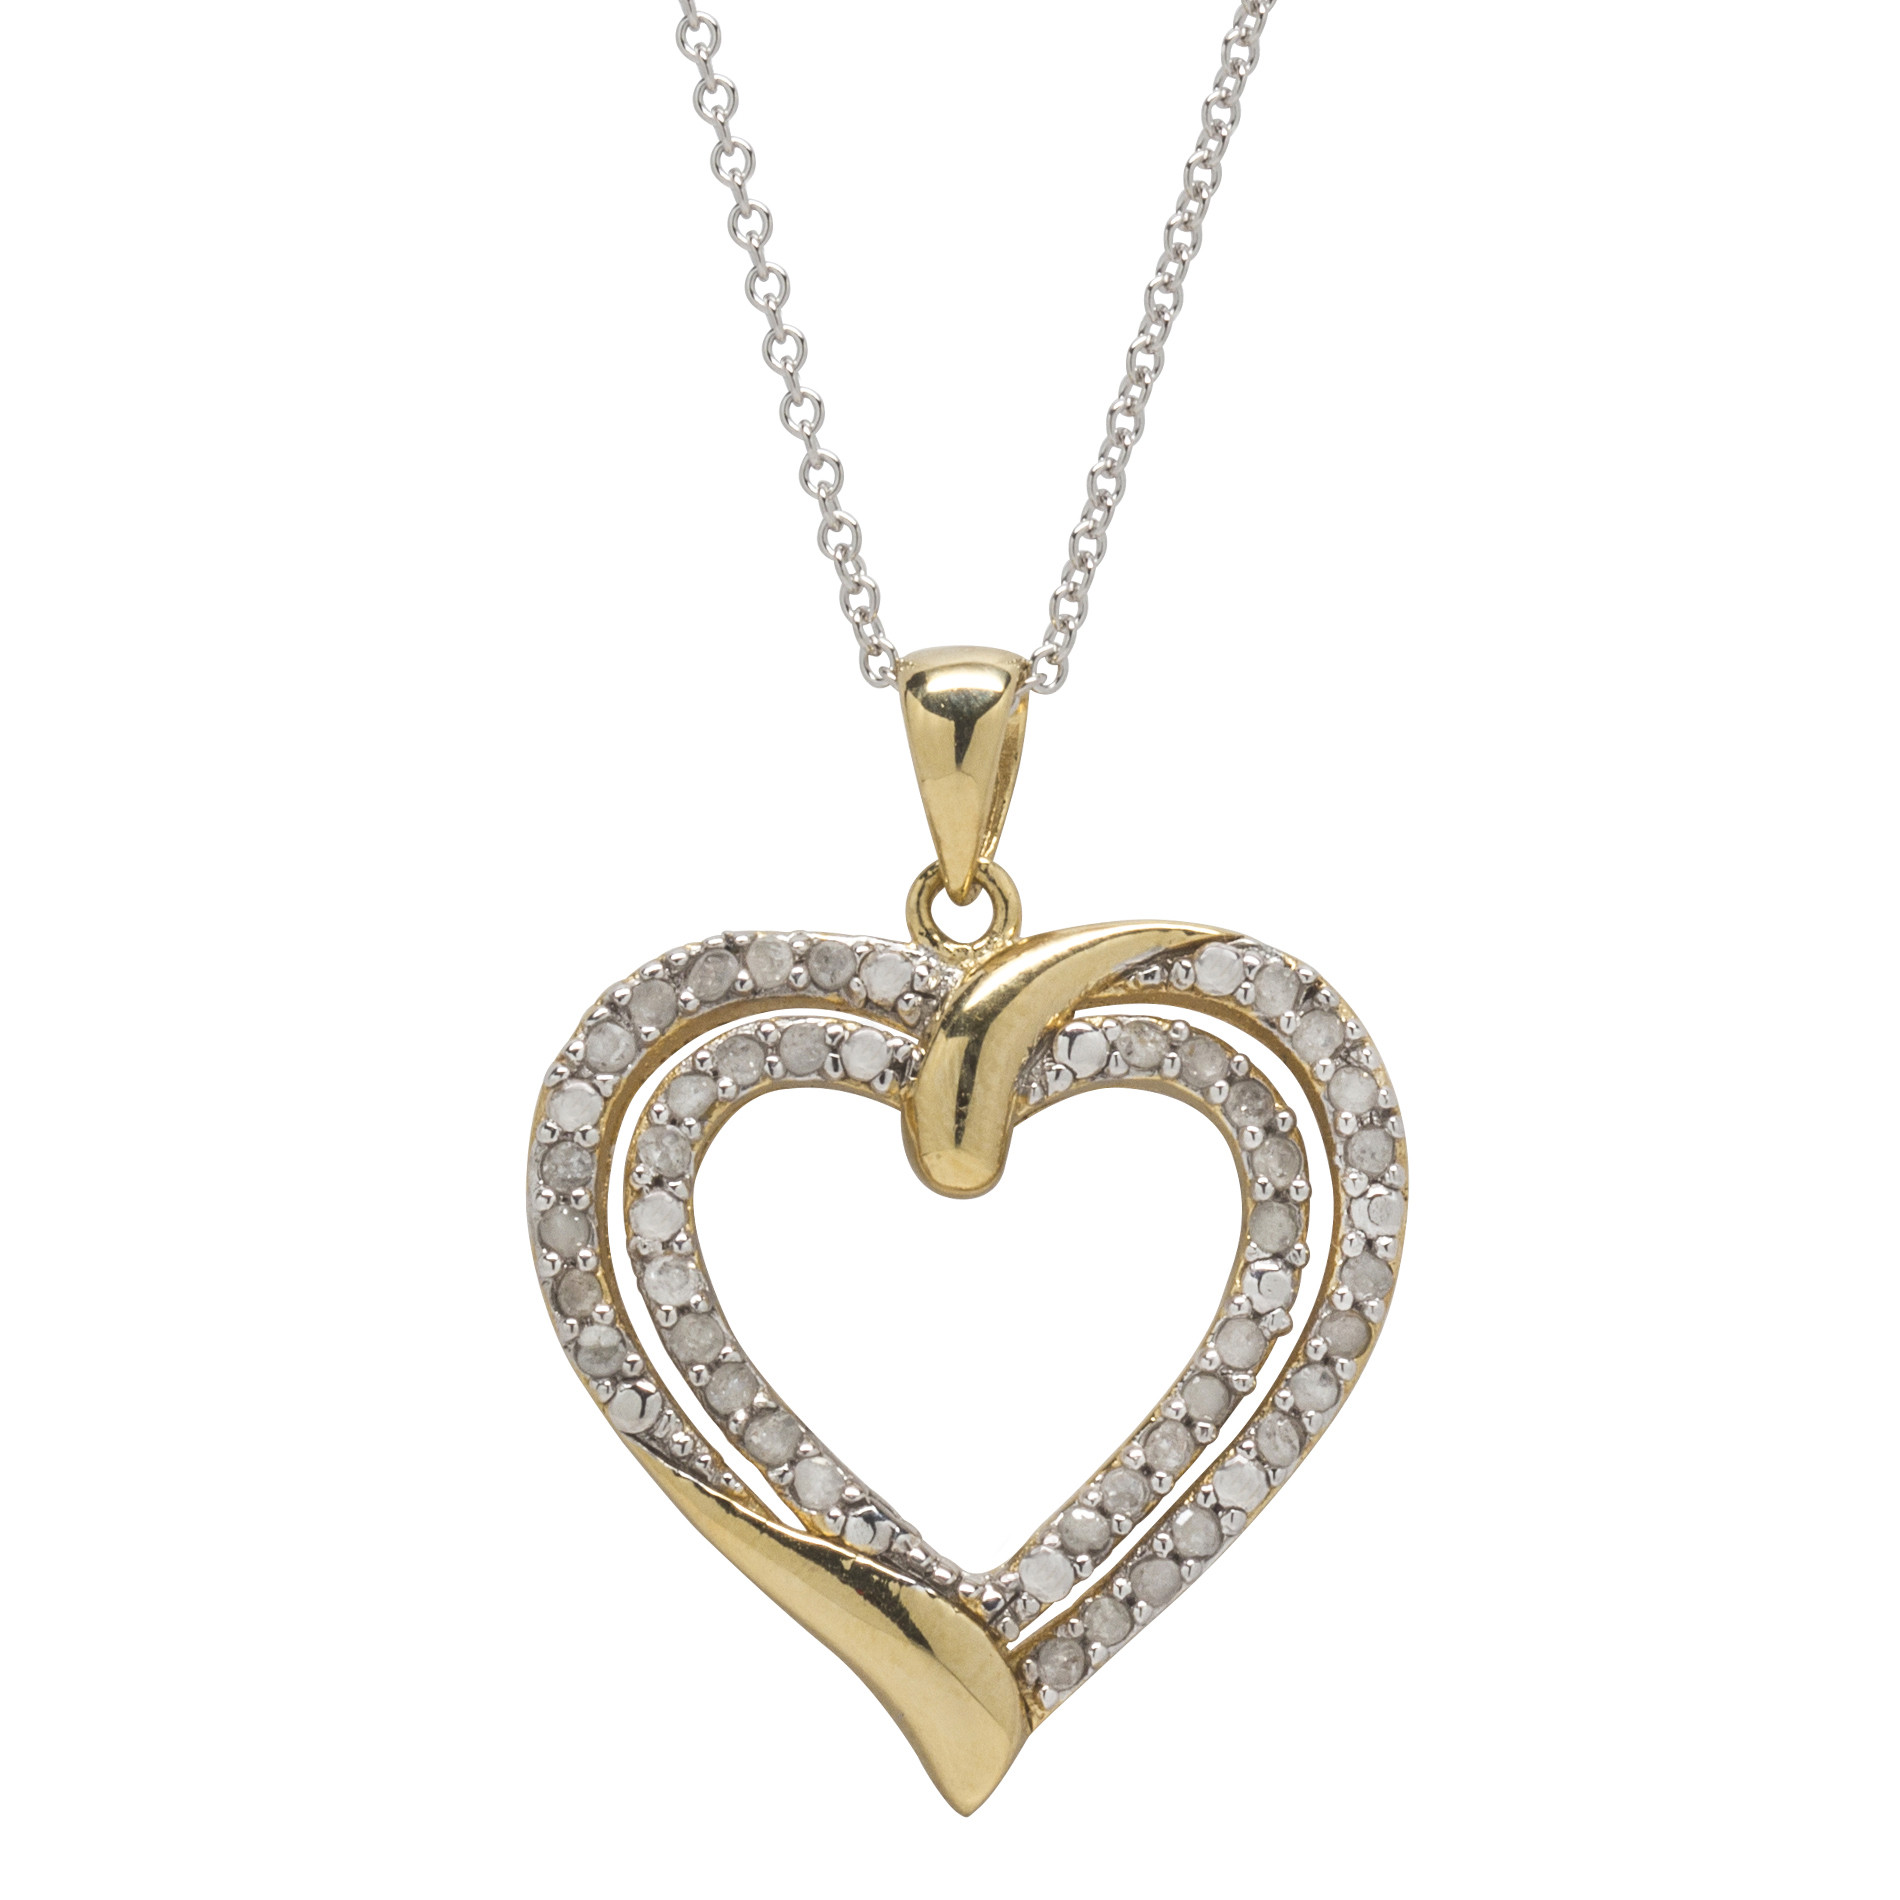 Gold Heart Necklace With Diamonds
 1 2Cttw Diamond Heart Pendant Gold over Silver